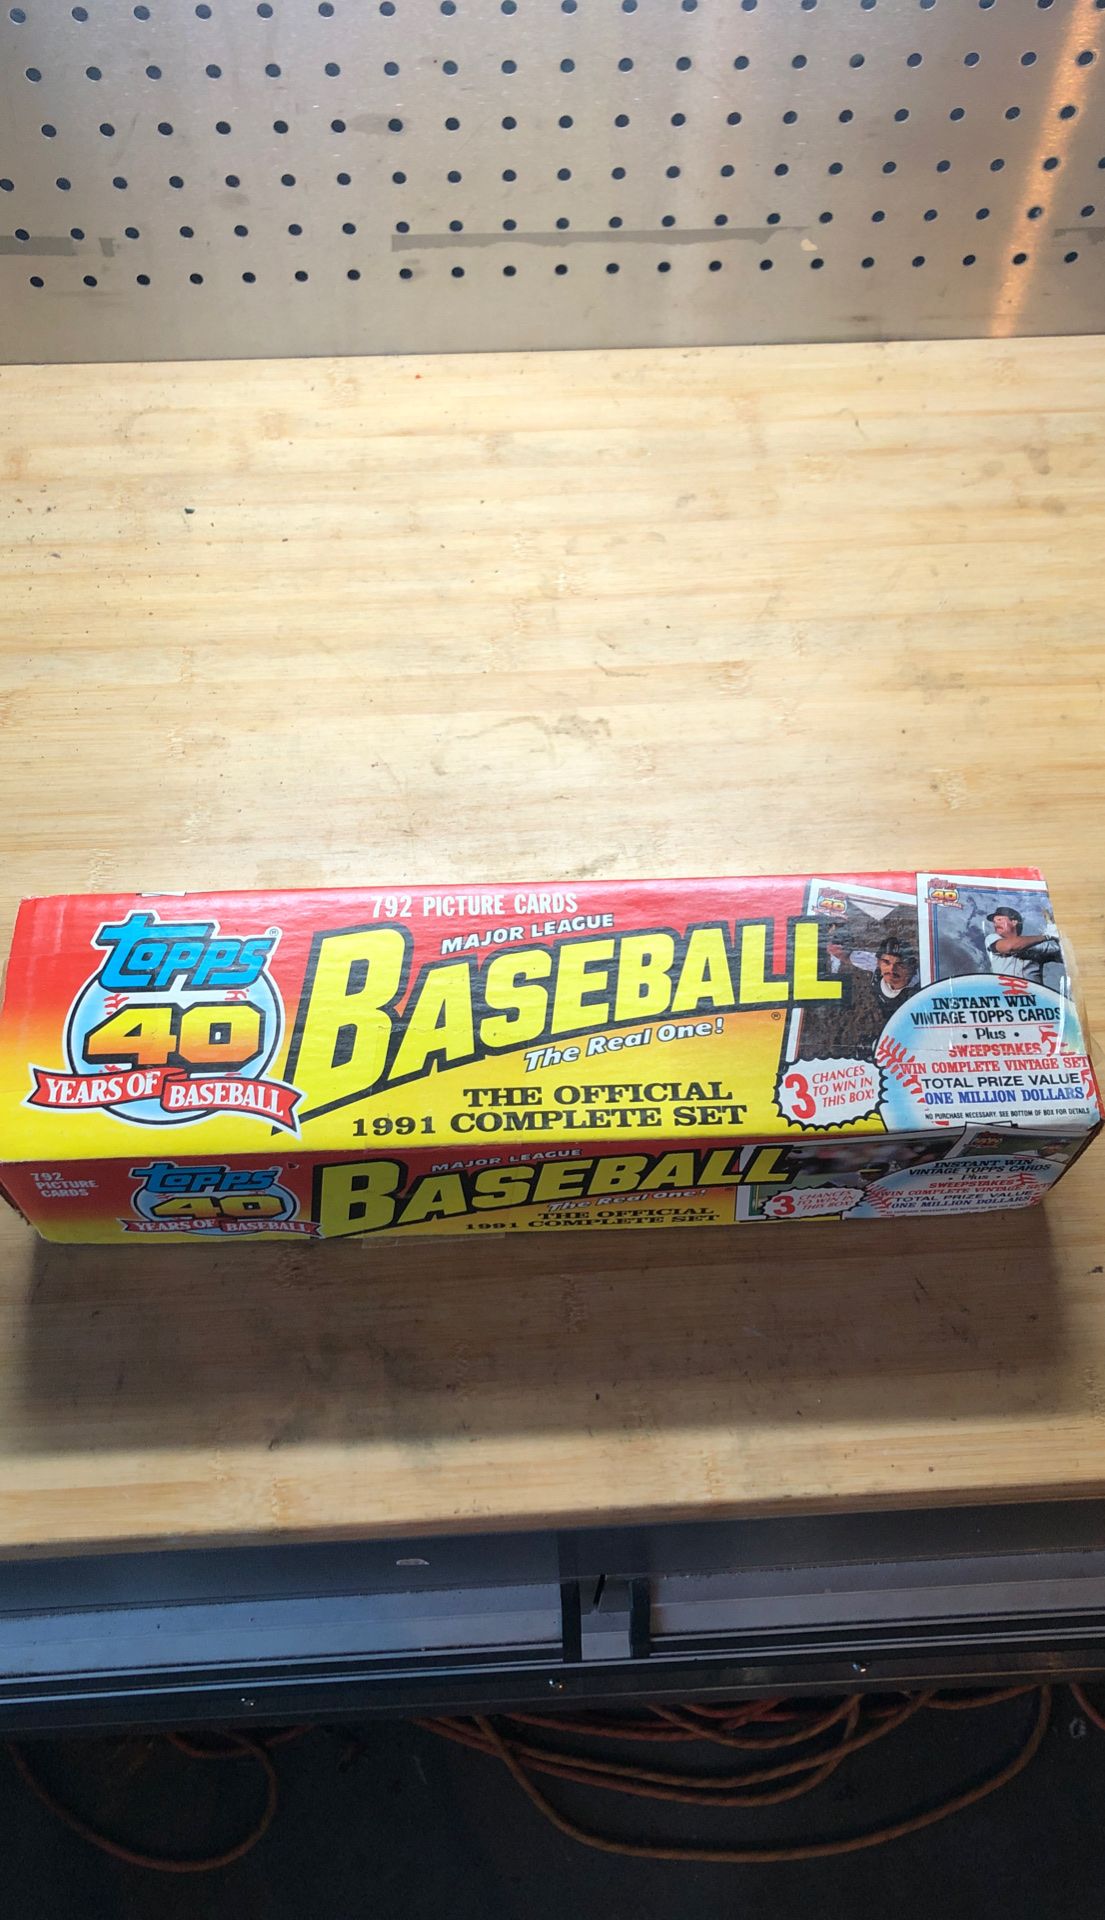 1991 Topps complete set.